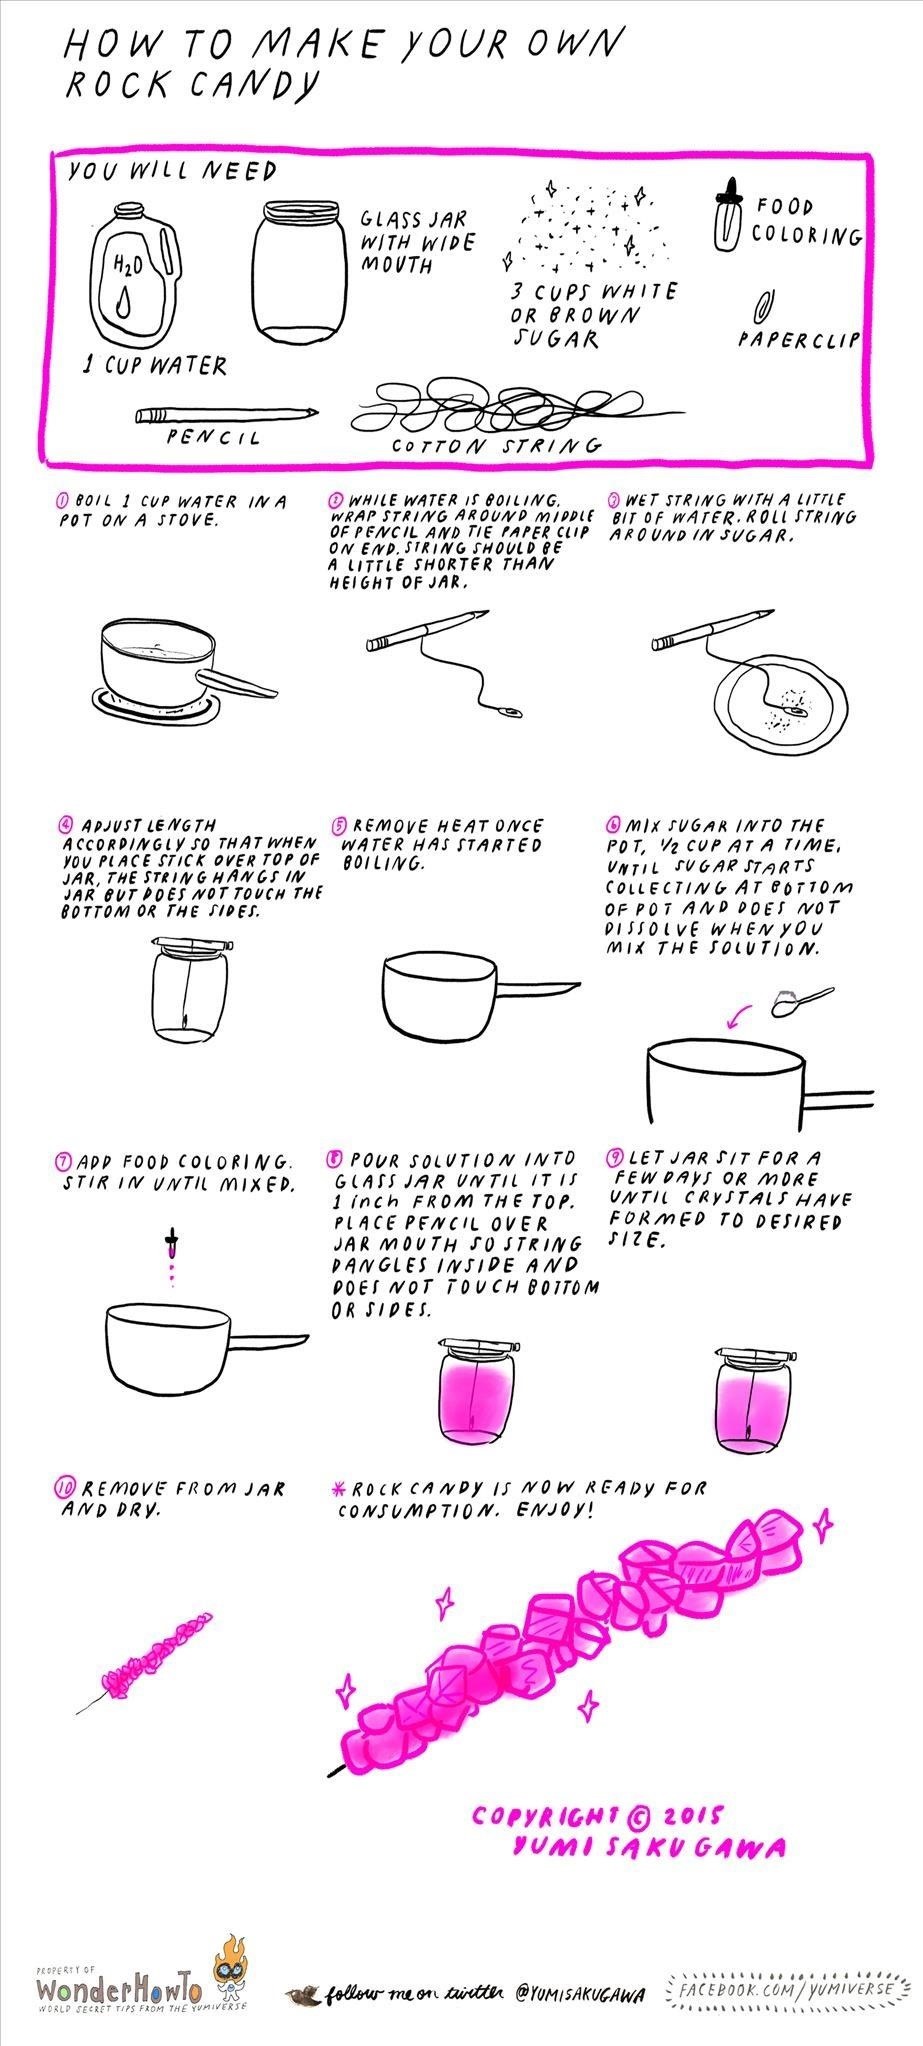 How to Make DIY Rock Candy at Home